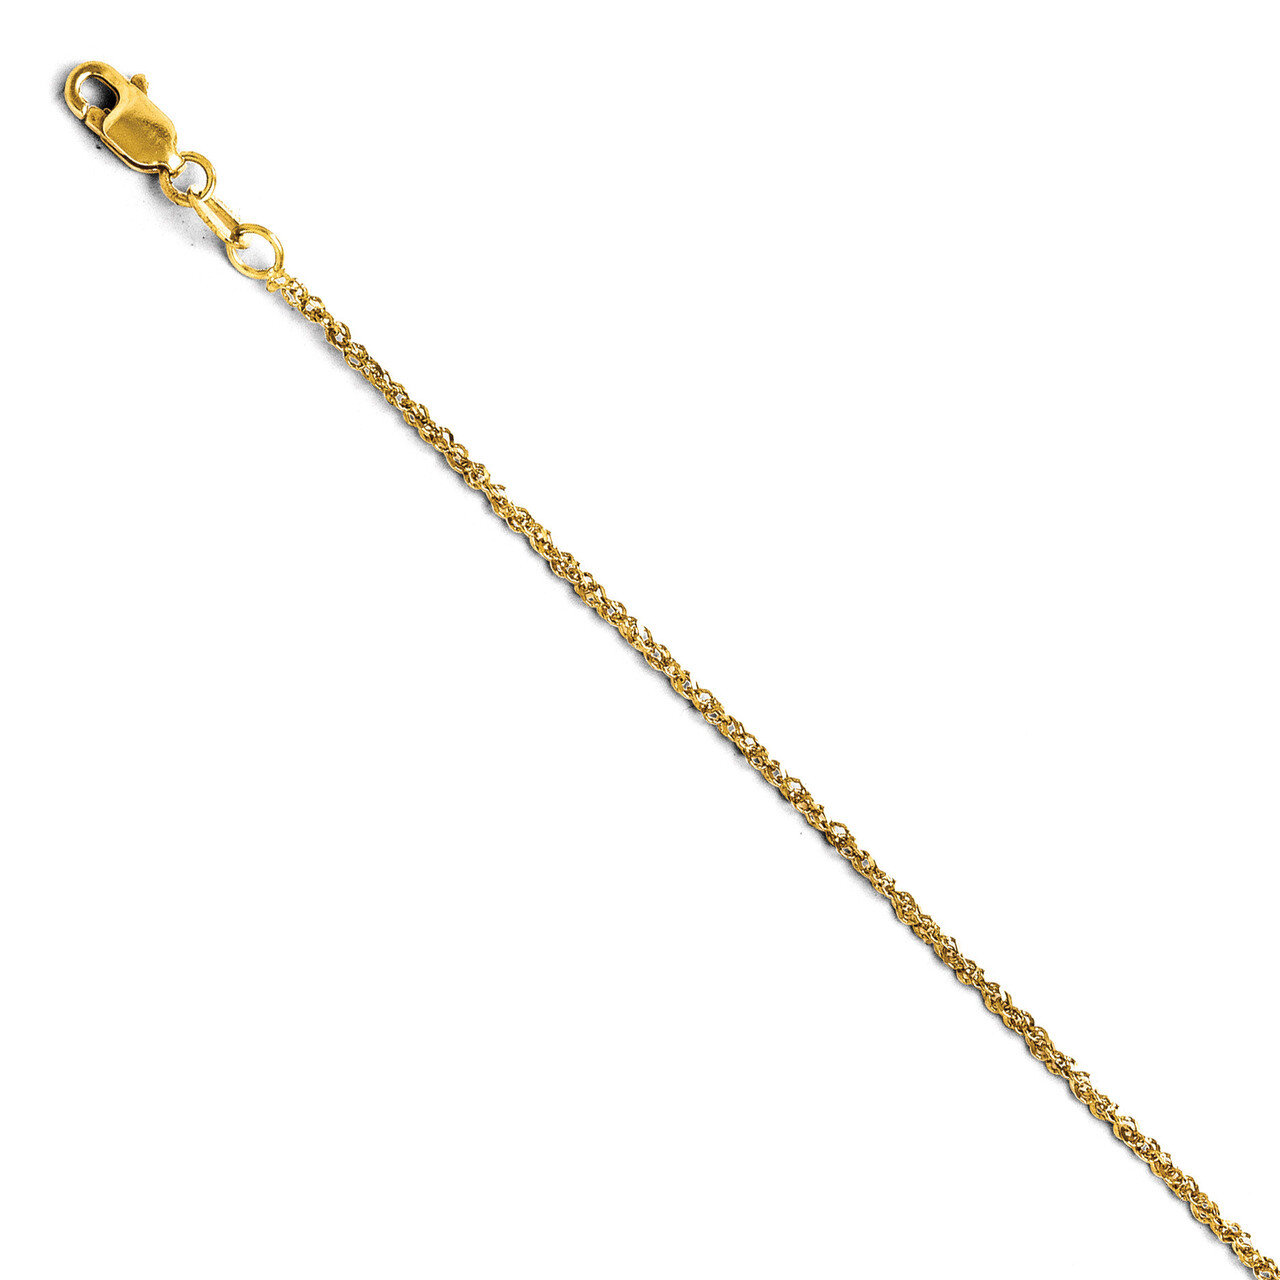 Sparkle Singapore Chain 20 Inch - 14k Gold HB-1830-20